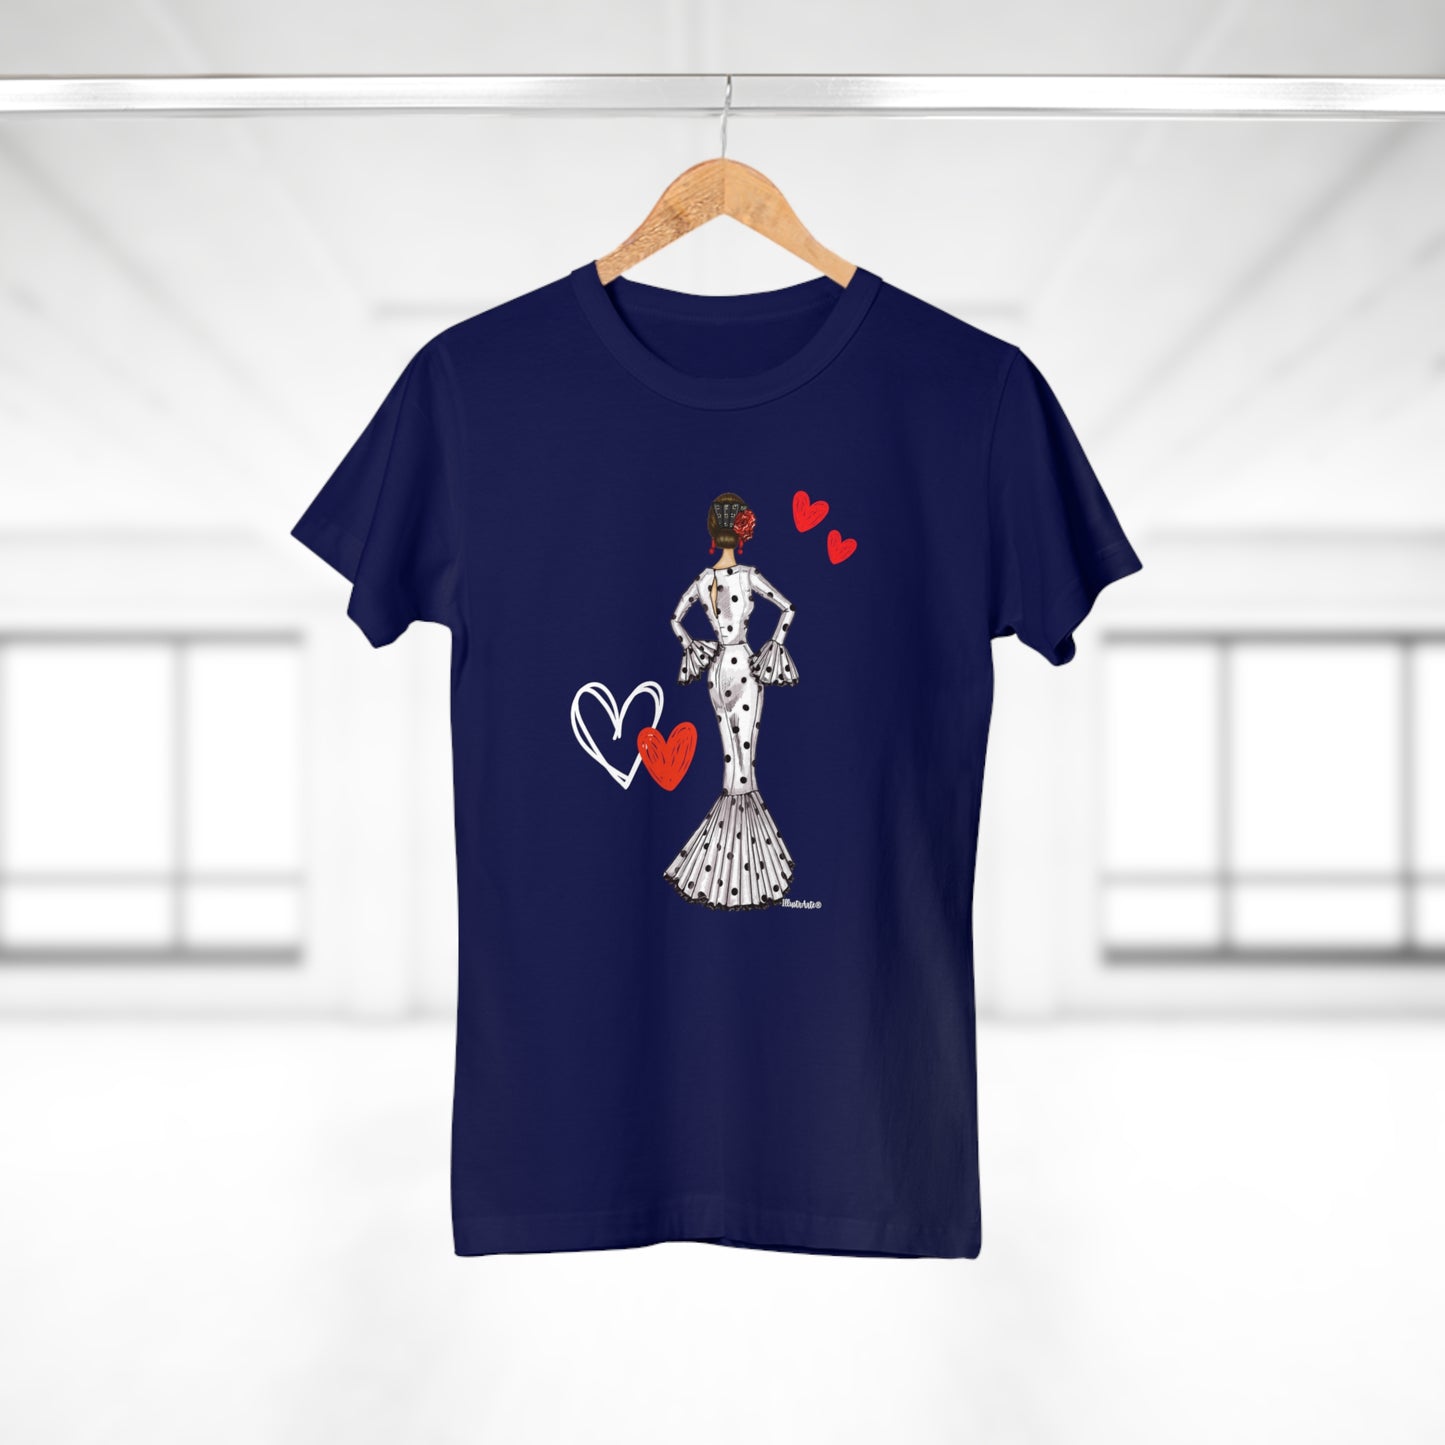 a t - shirt with a woman holding a heart